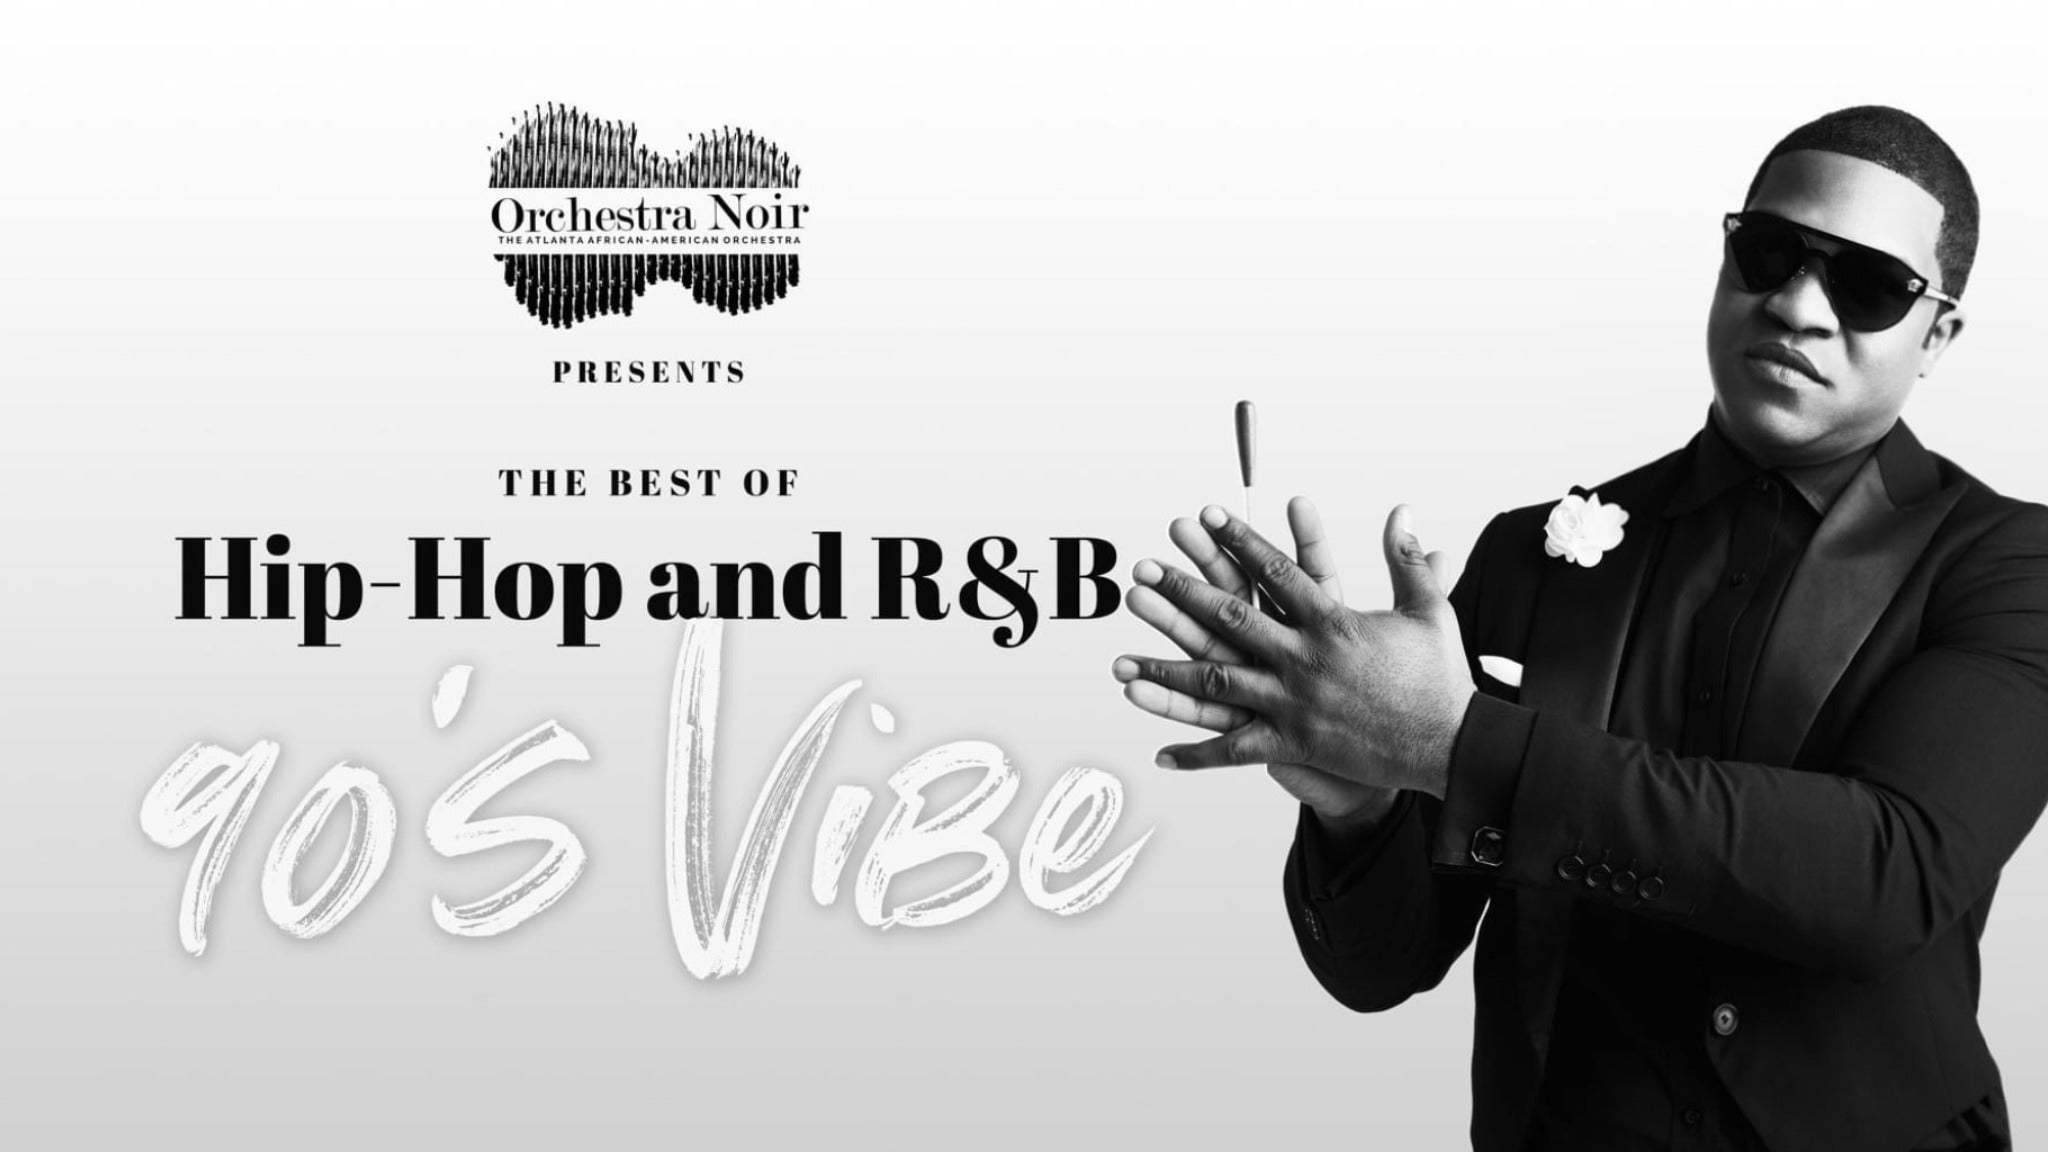 Orchestra Noir Presents: 90’s Vibe The Best of Hip-Hop and R&B:Atlanta